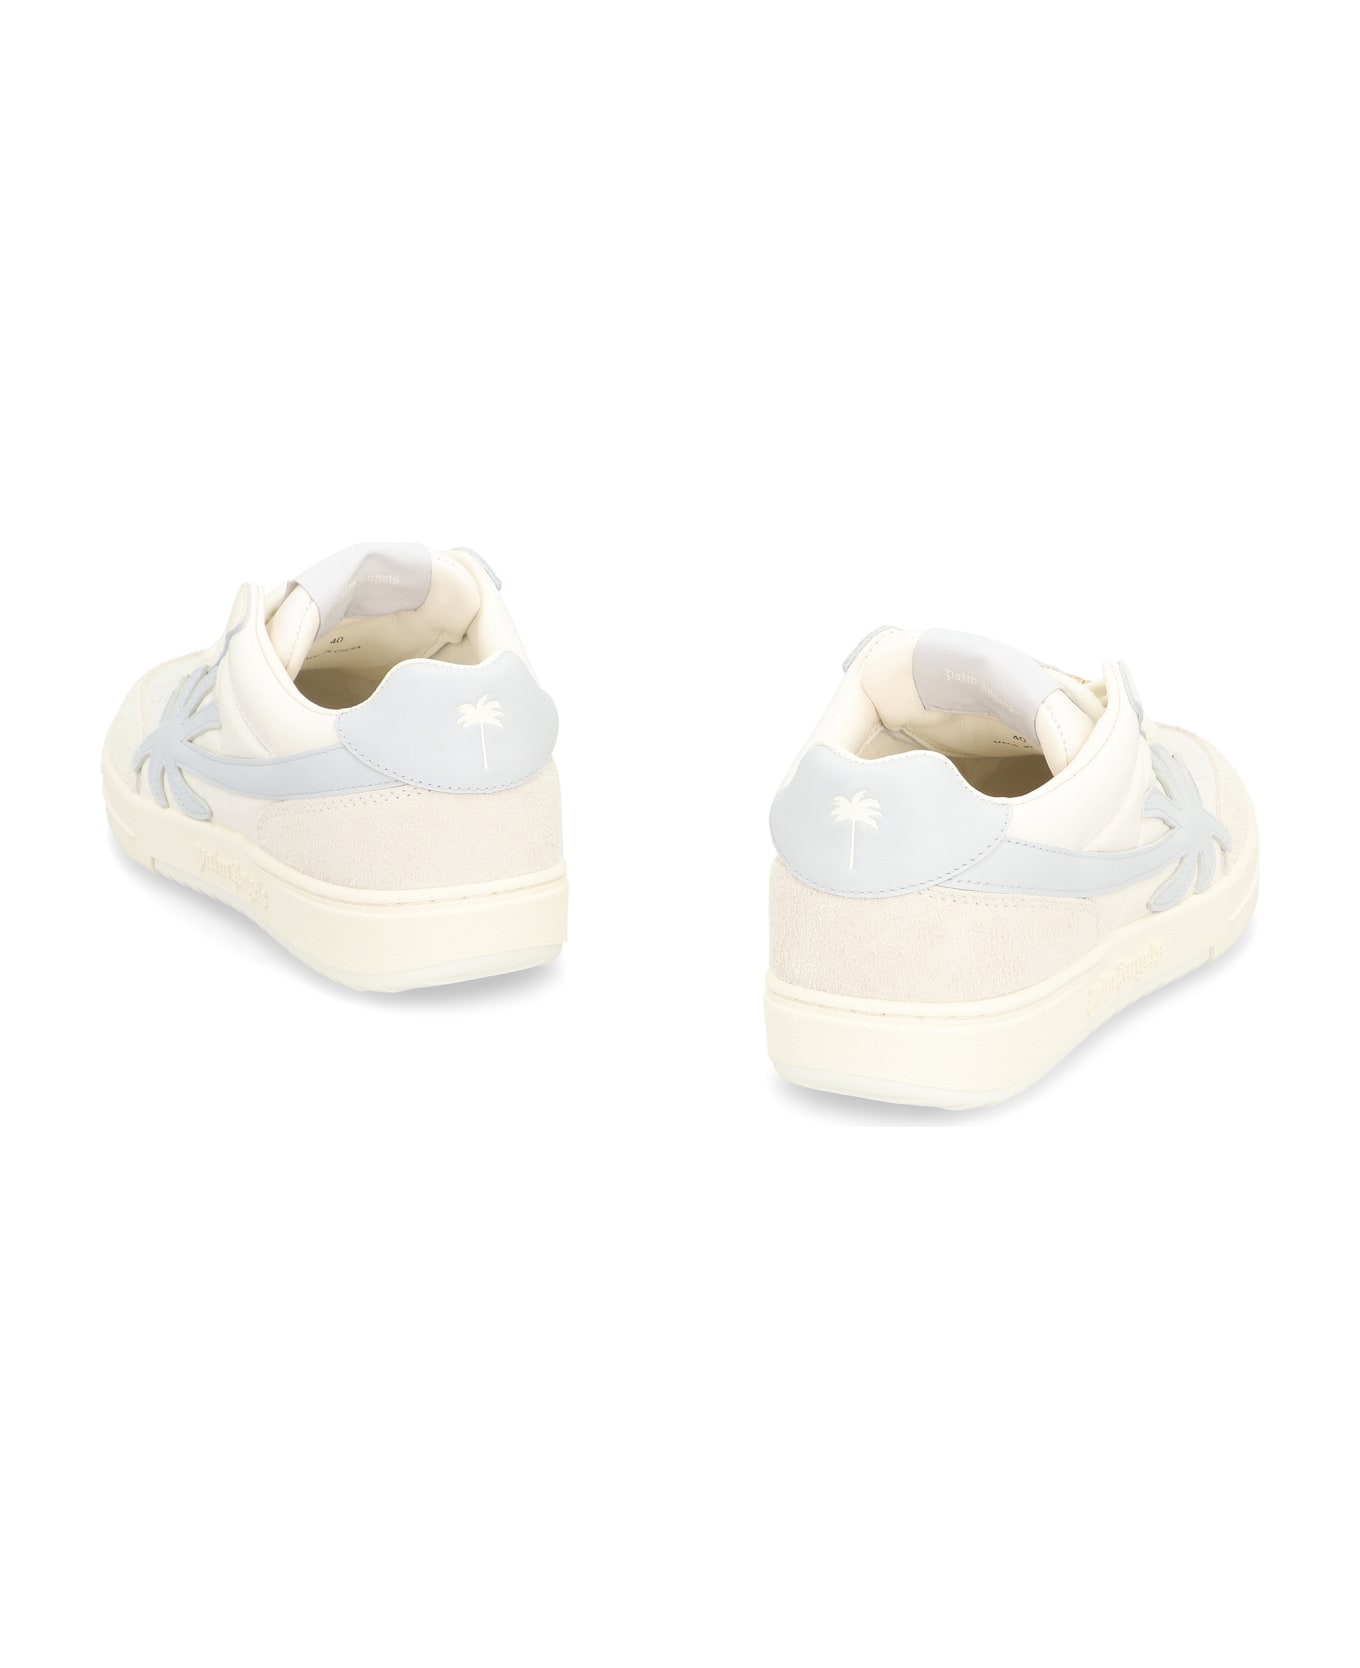 Palm Angels Palm Beach University Leather Low Sneakers - White